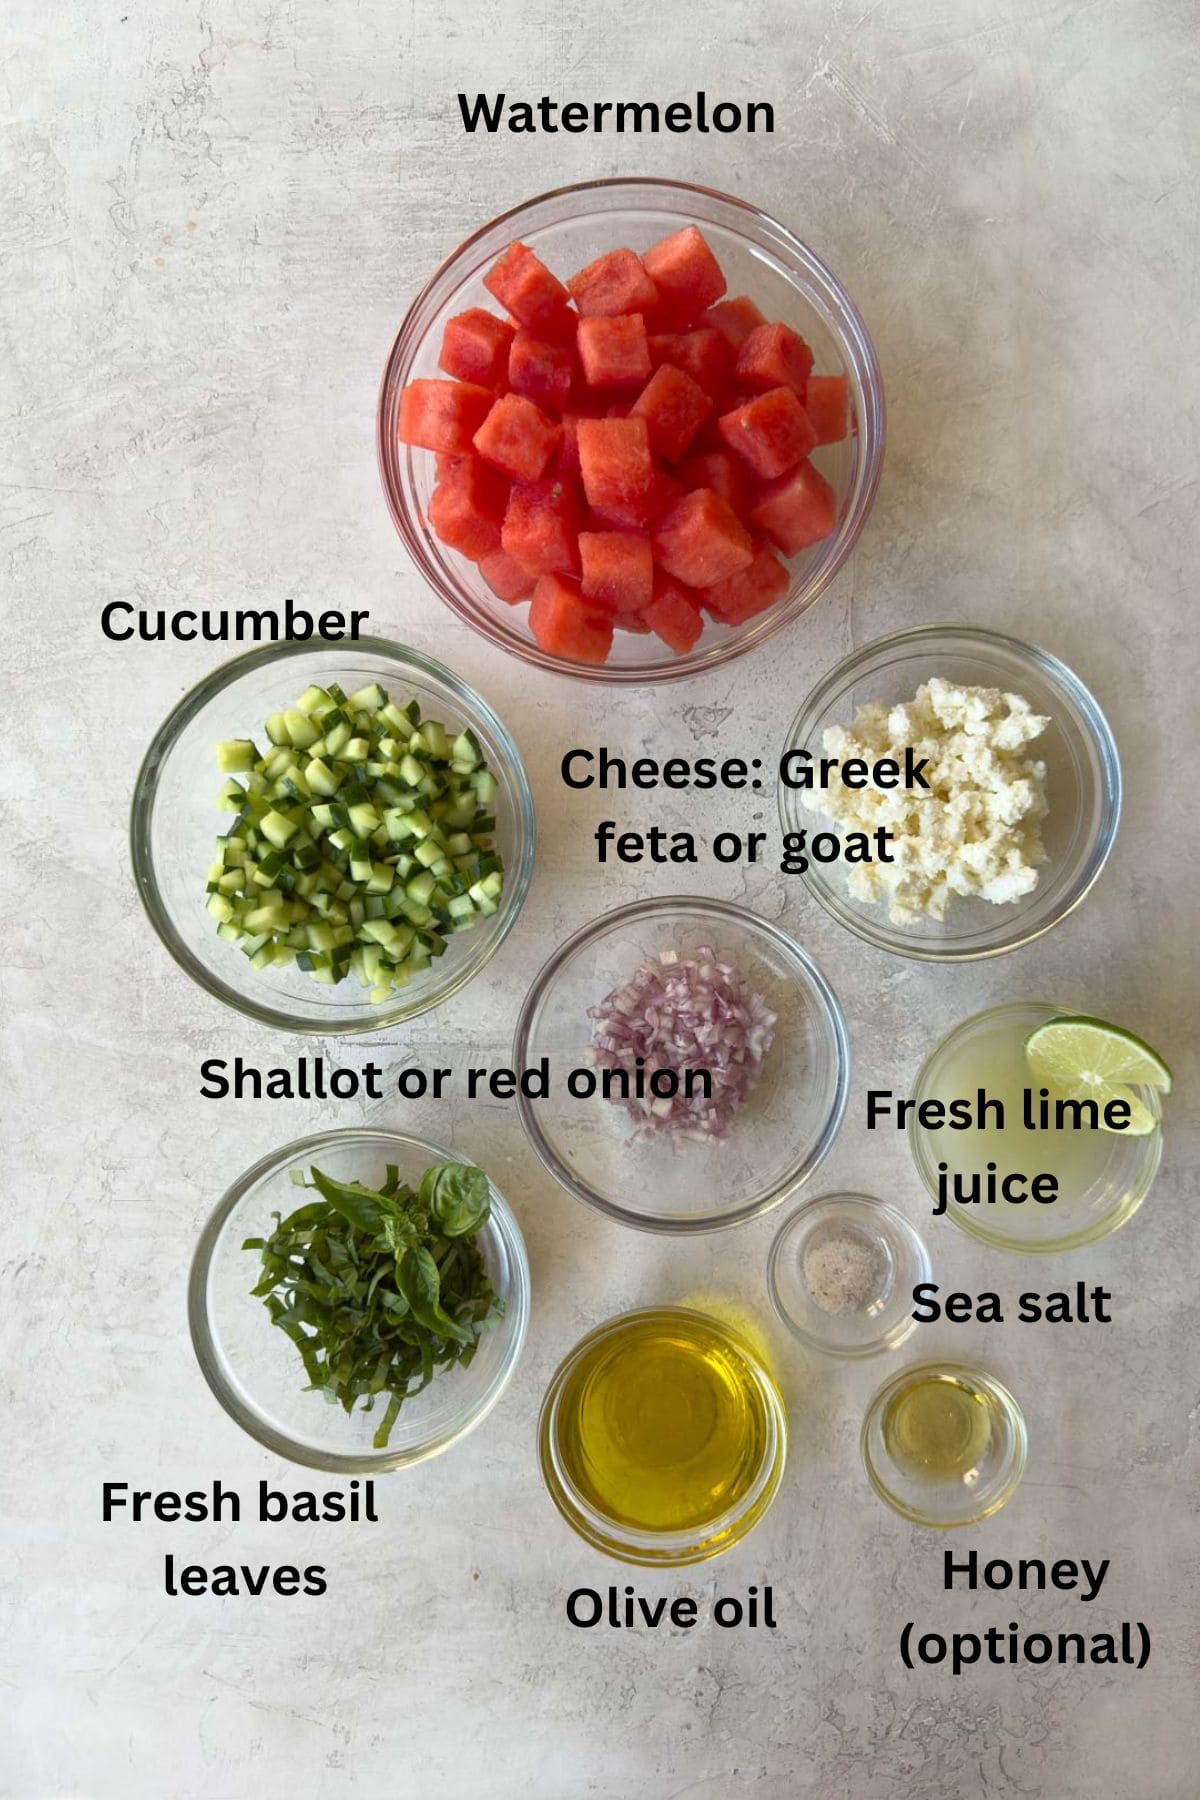 Ingredients for a refreshing watermelon salad.